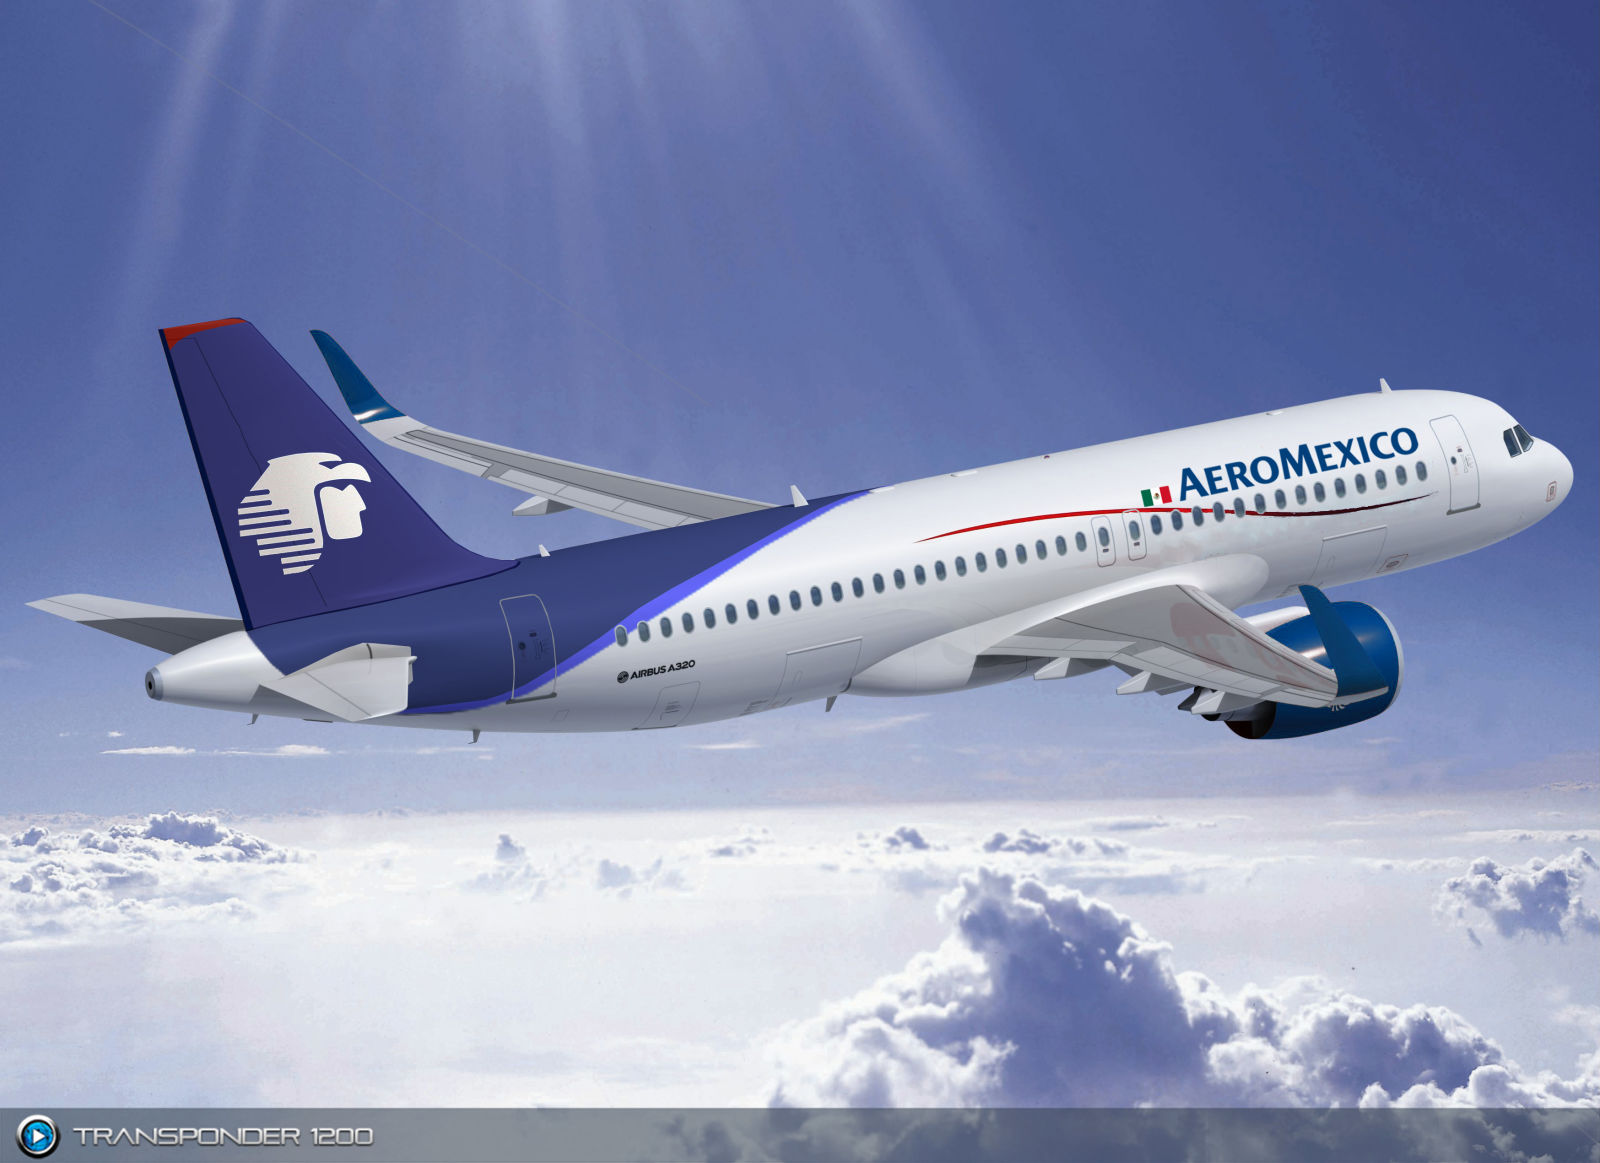 Illustration for article titled Aeromexico also grounded the jets